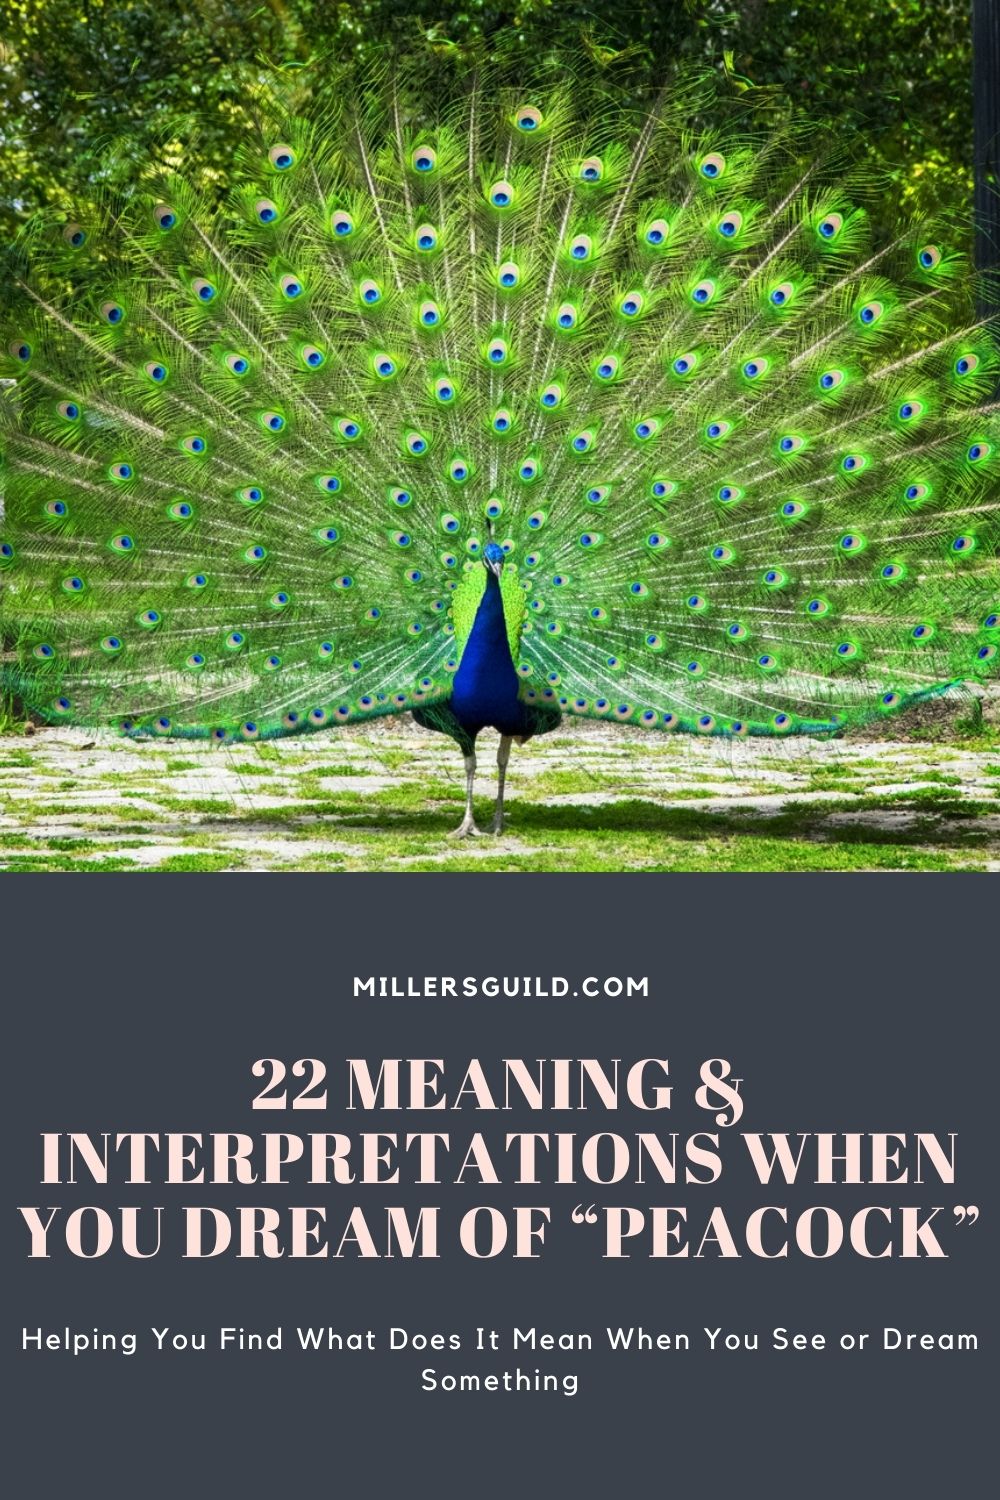 22 Meaning & Interpretations When You Dream of “Peacock” 2